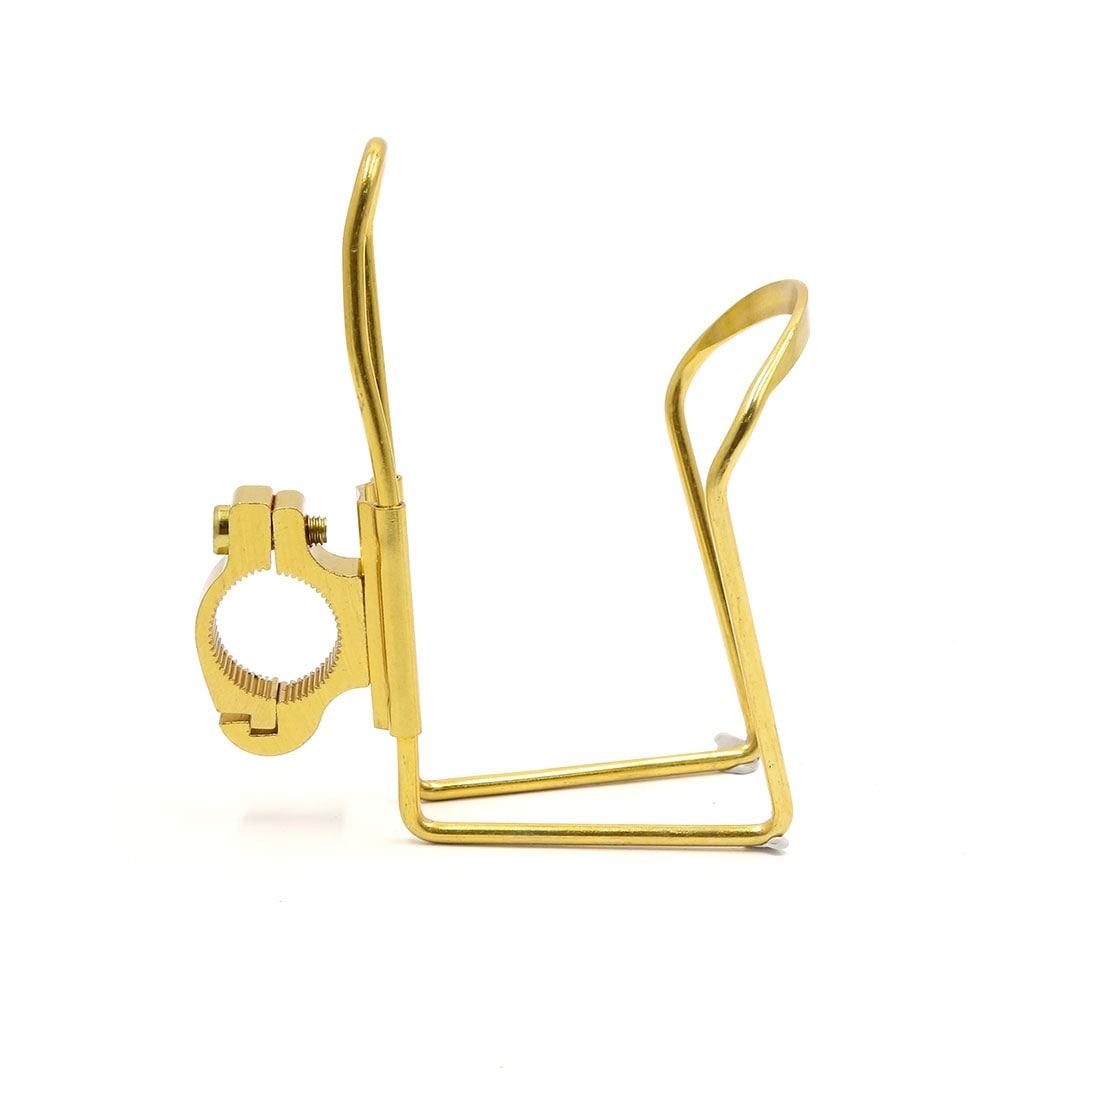 gold water bottle cage